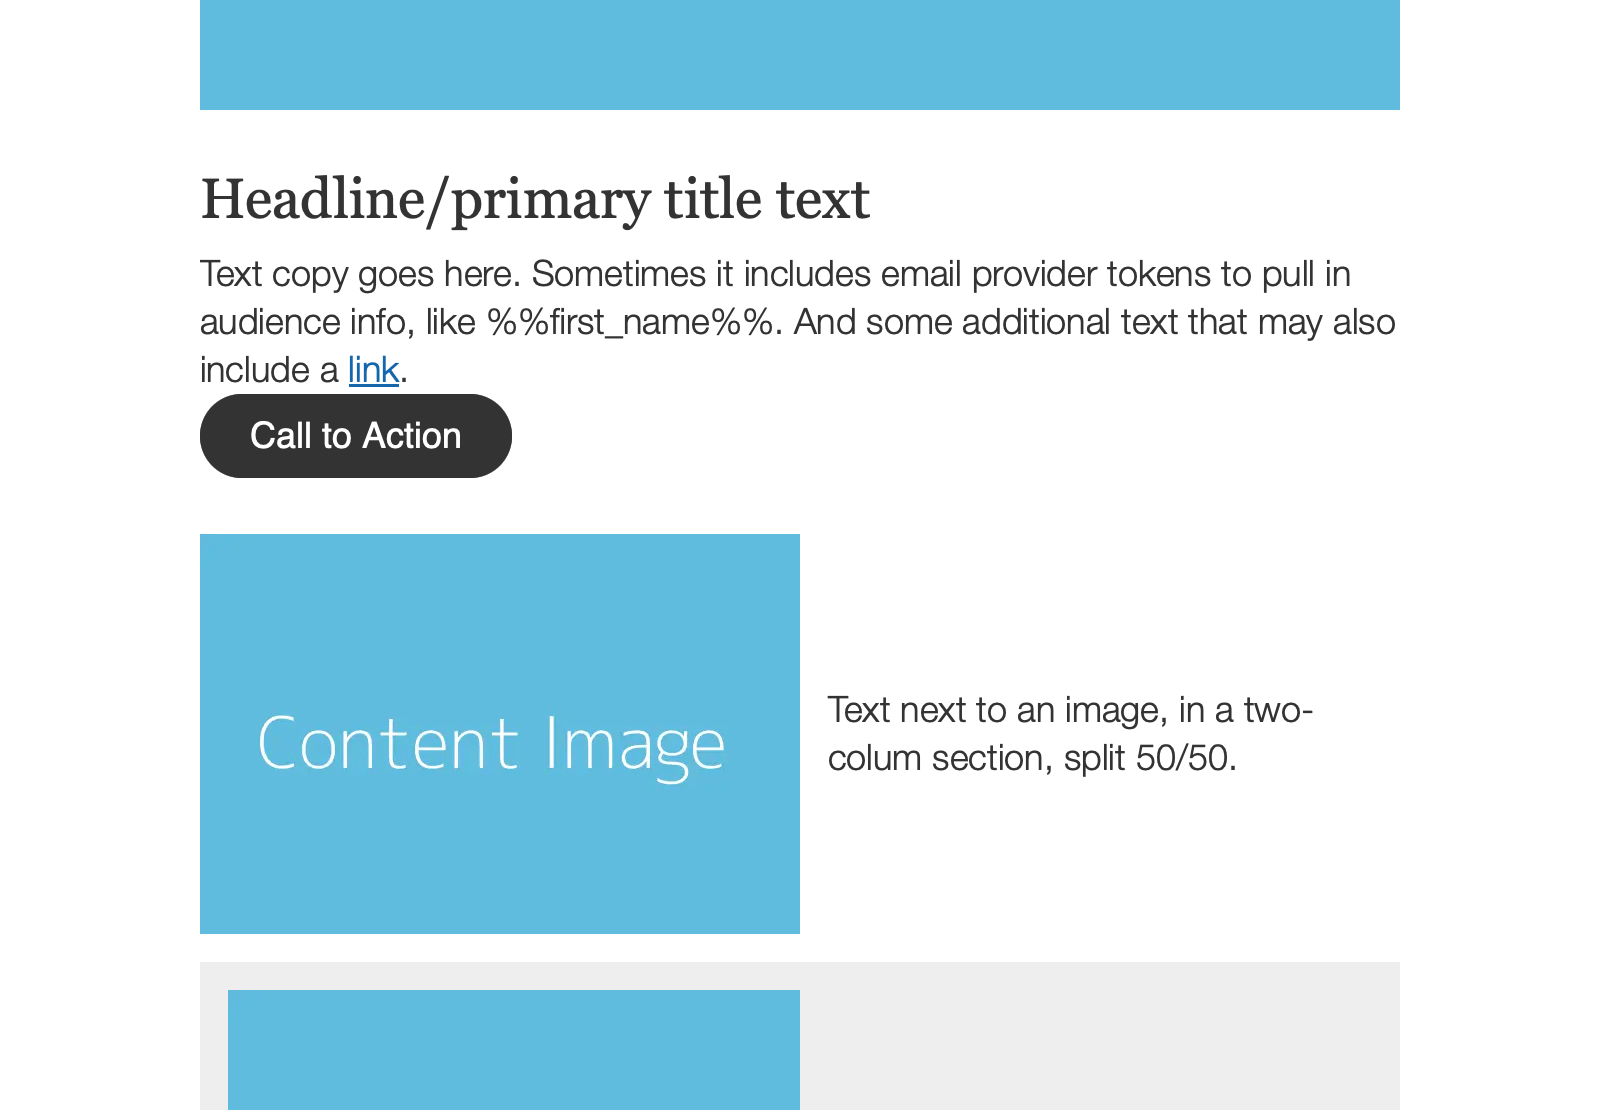 An email template shown with various spacing examples.